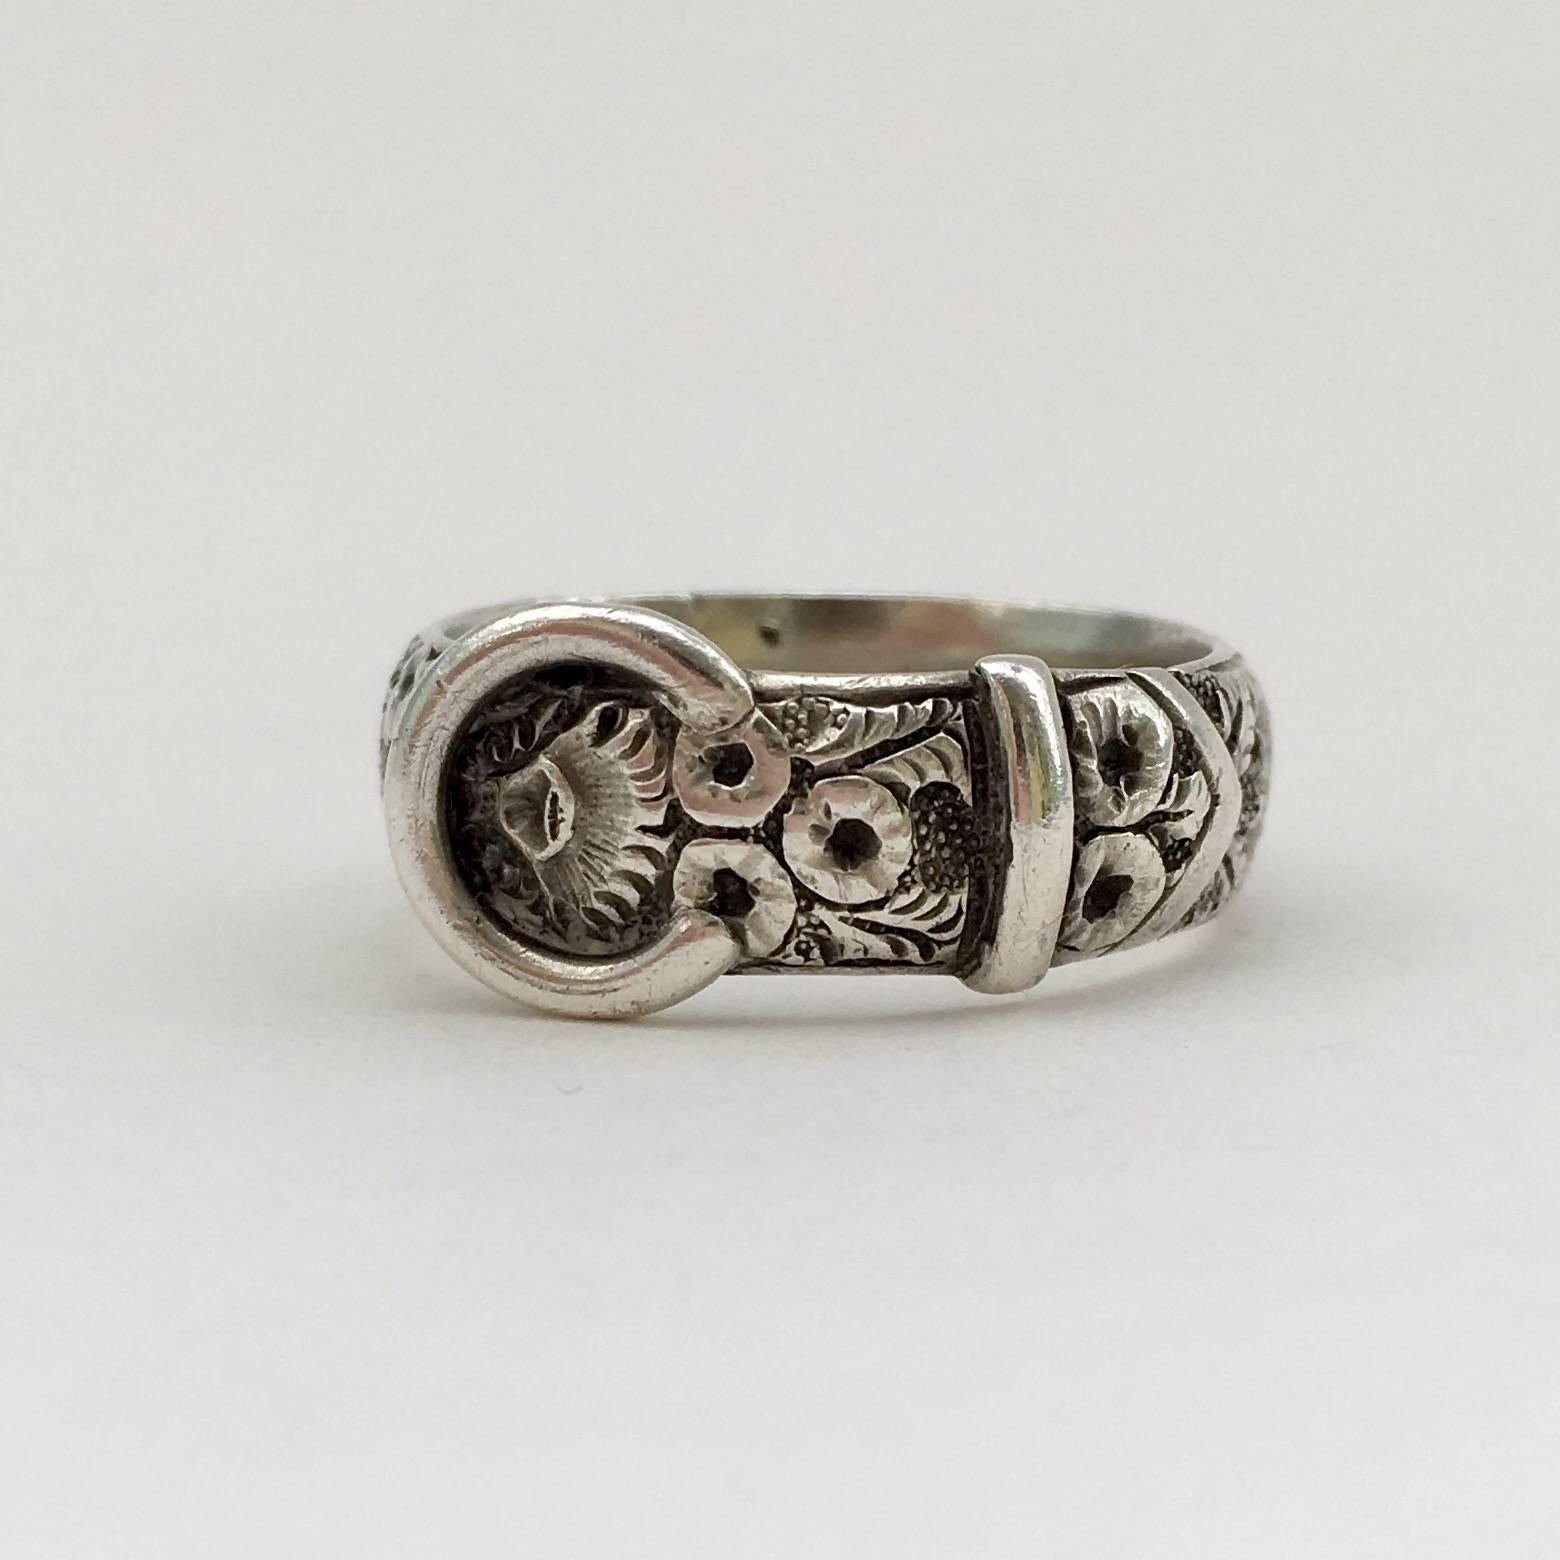 This beautiful engraved ring dates from 1882. It is a lovely example of a buckle ring from the Arts and Crafts period. It has a nice weight, making it pleasingly tactile, and is engraved with a charming floral design. 

Size: UK O, US 7